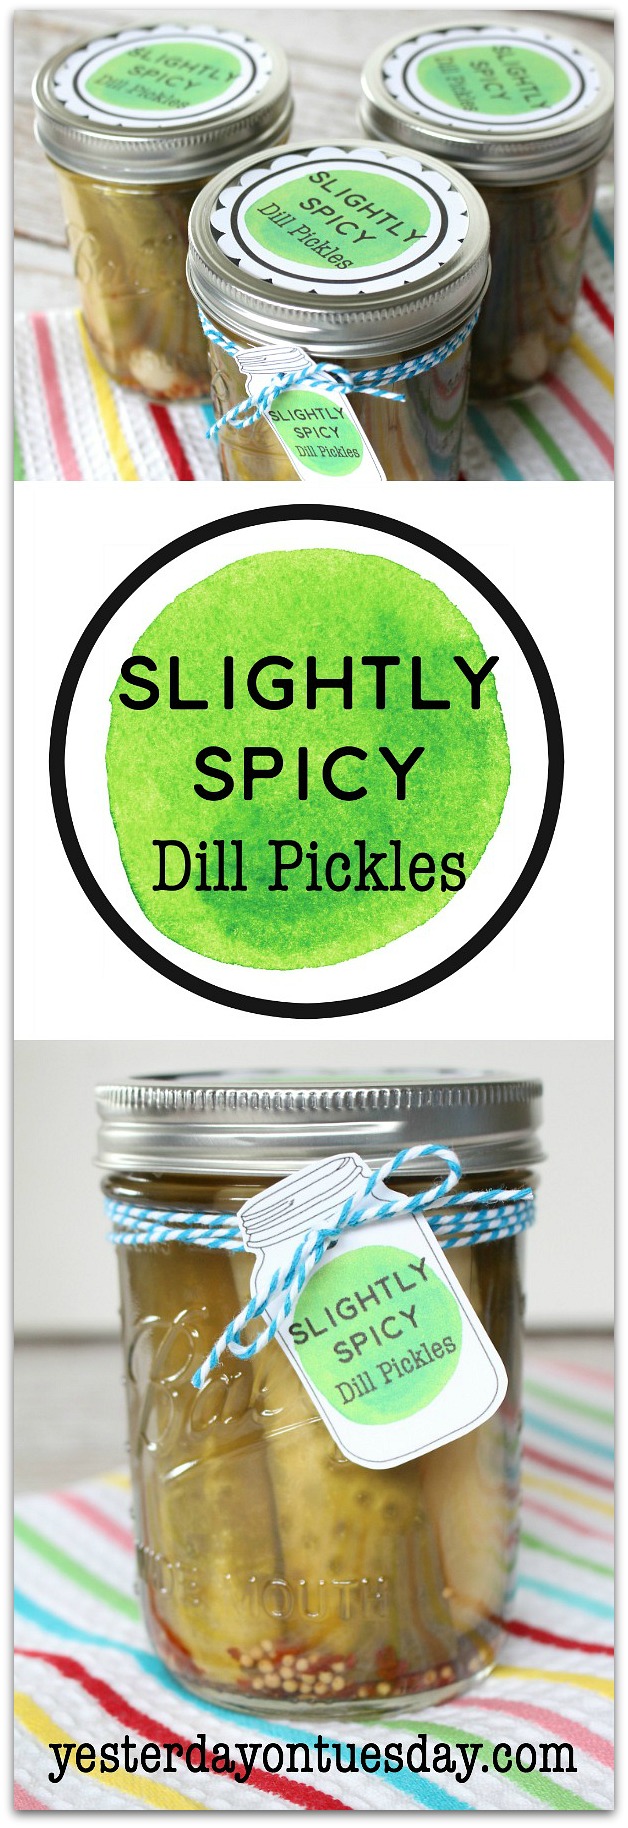 Slightly Spicy Dill Pickles